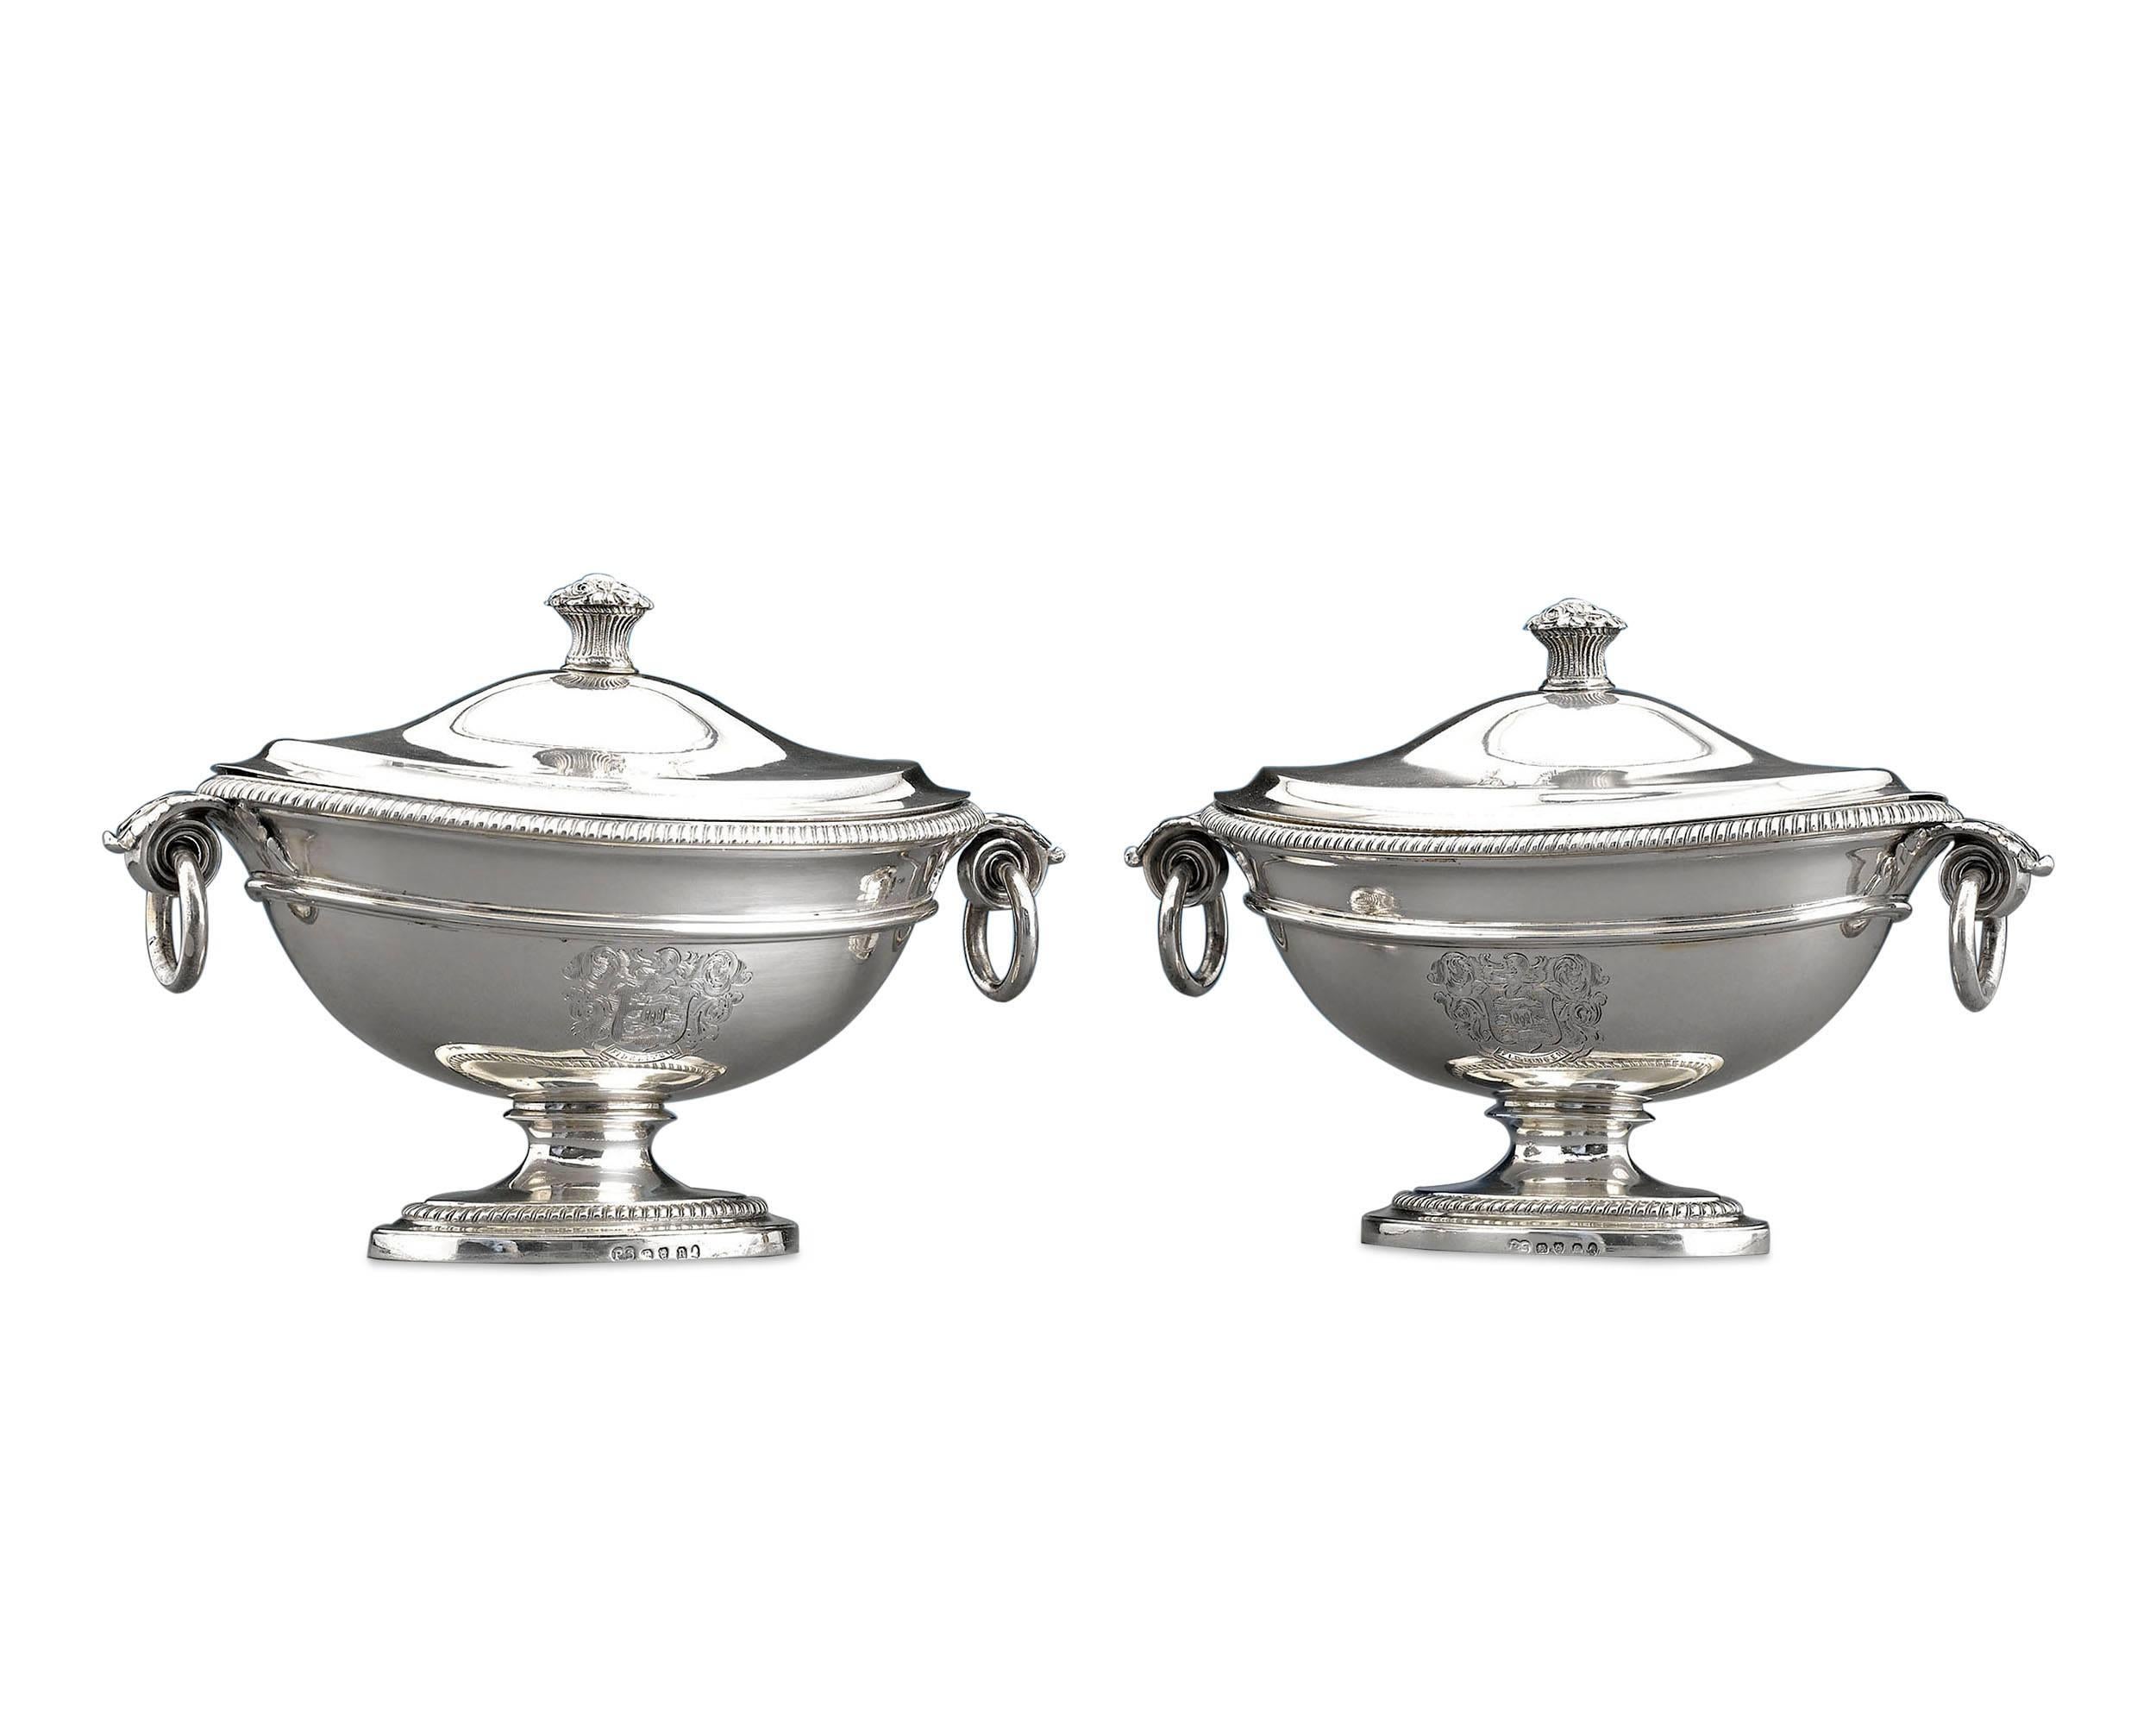 Legendary silversmith Paul Storr showcased his remarkable skill in these elegant covered sauce tureens. Exhibiting a sublime neoclassical design, these dishes are exquisite examples of Storr’s talent for detailed execution, from the delicate fruit